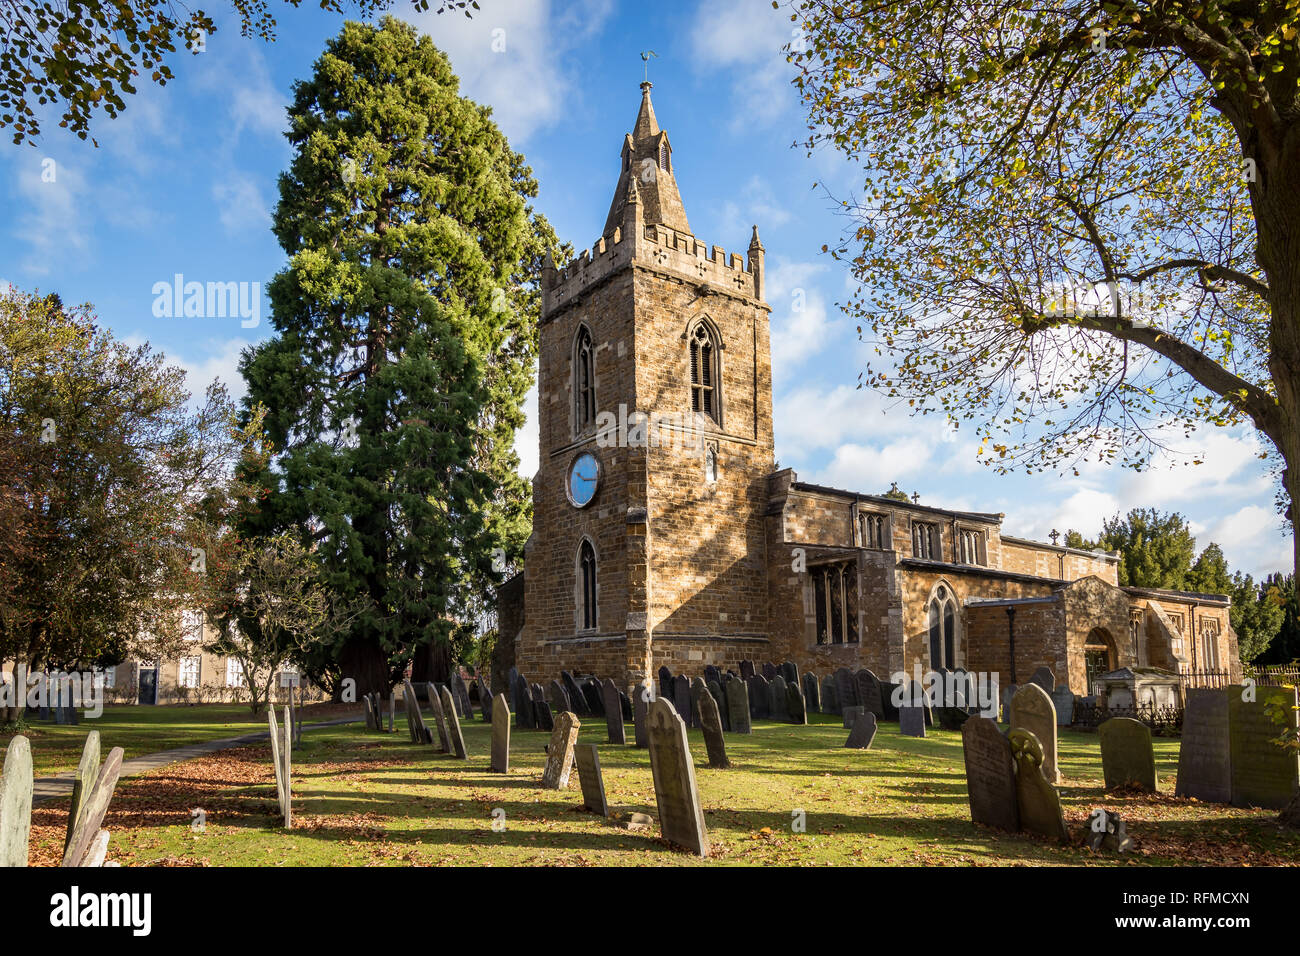 St. Peter & Paul Kirche, große Bowden, Market Harborough Leicestershire, England Stockfoto